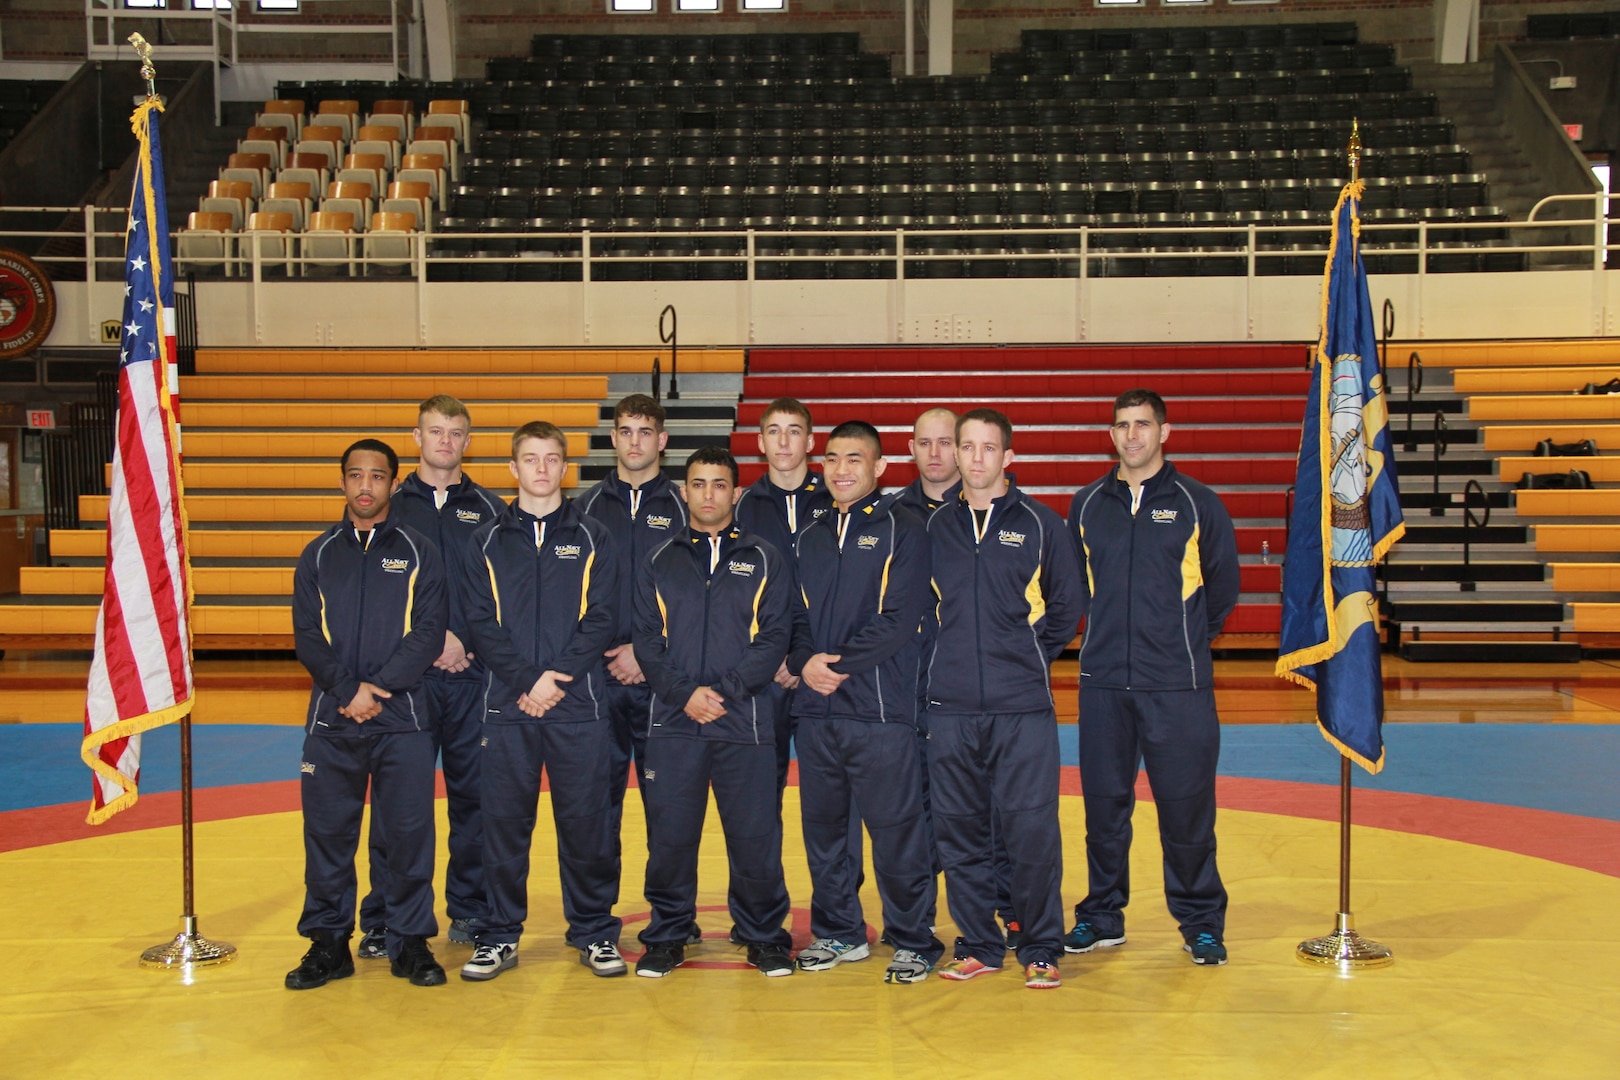 All-Navy Wrestling Team competing here at the 2014 Armed Forces Wrestling Championship at MCB Camp Lejeune, NC 7-8 March.